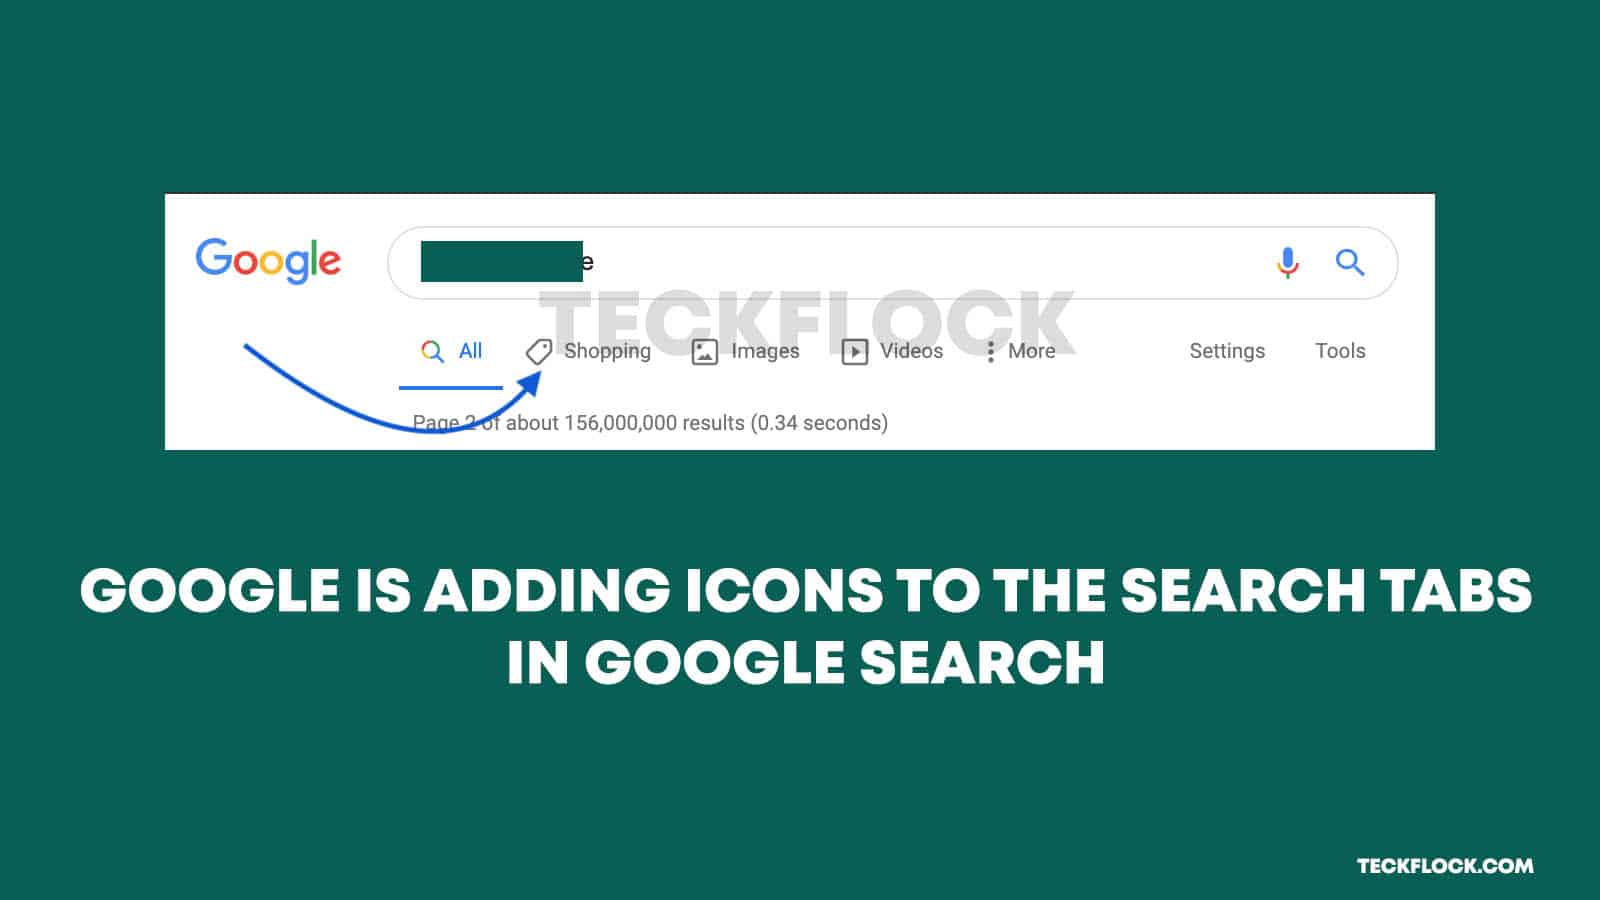 Google adds Icons to Search Tabs